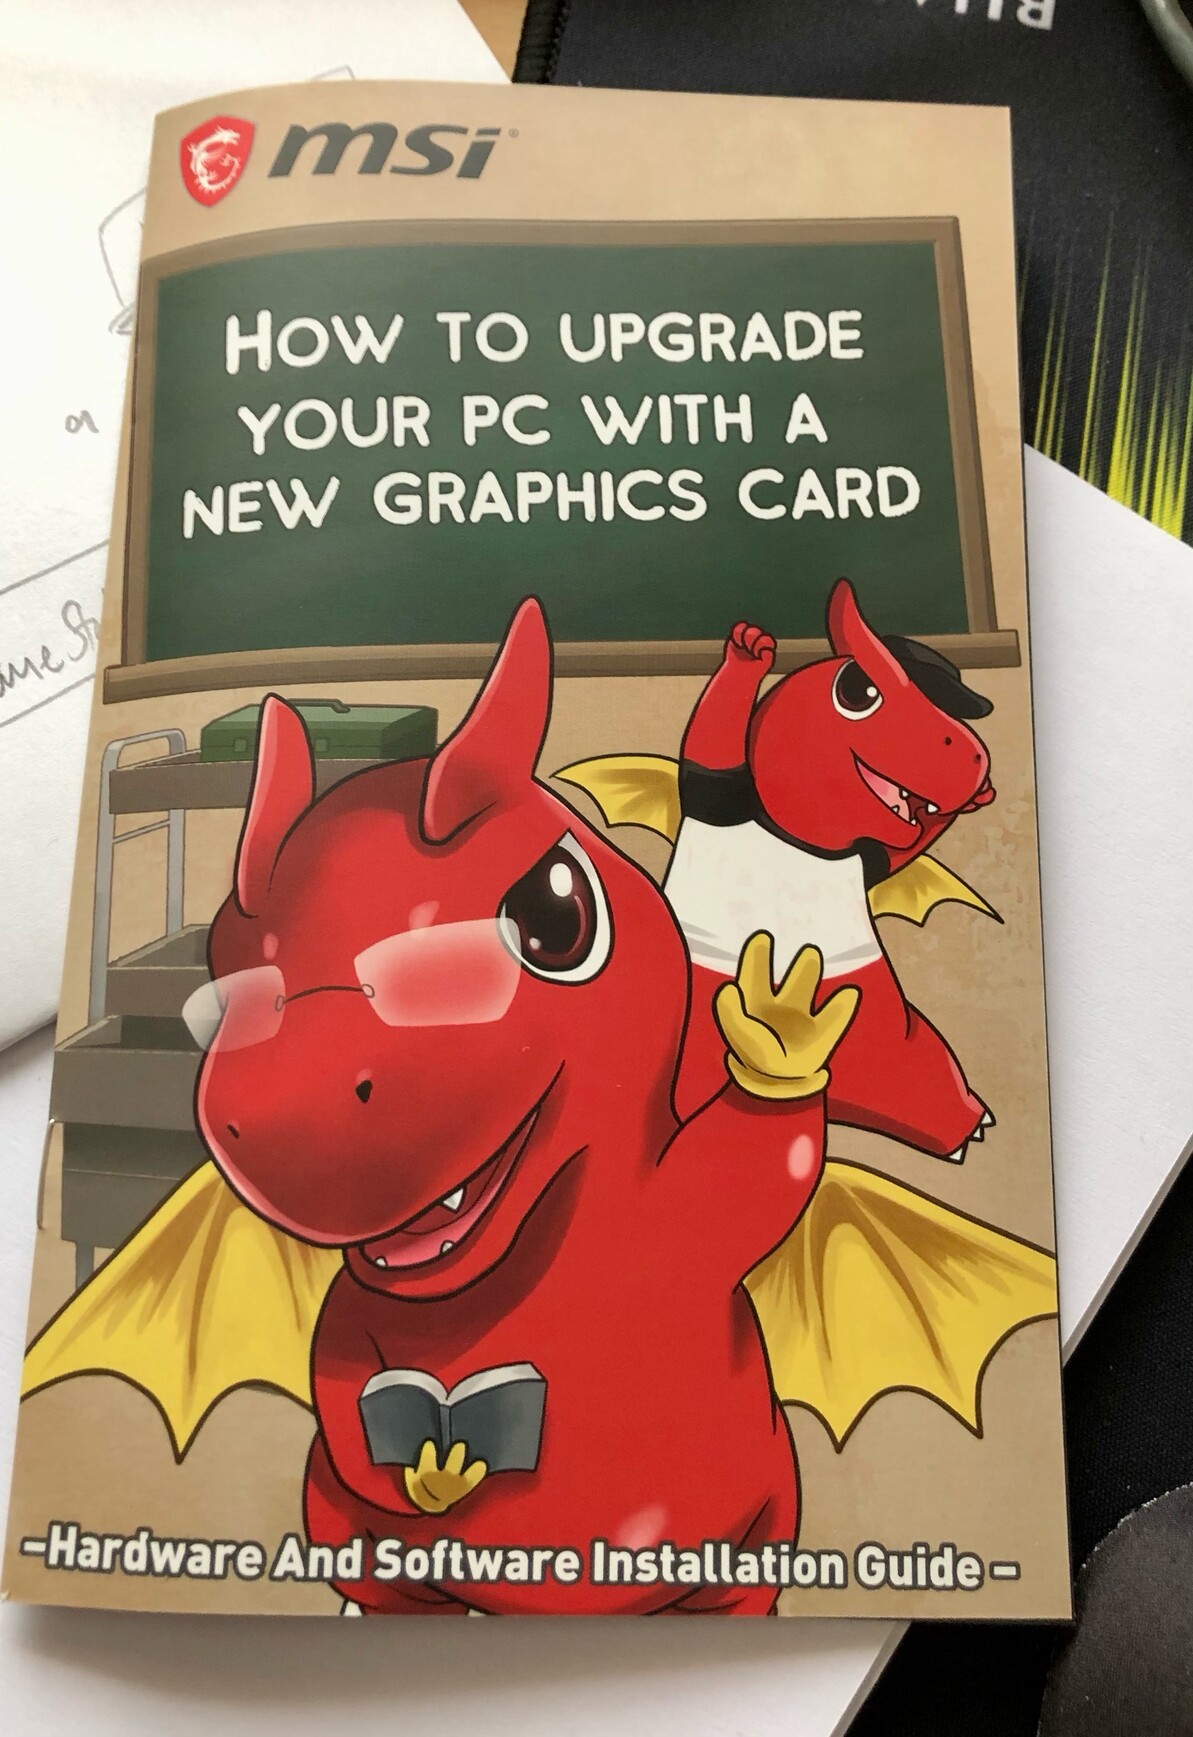 MSI instruction booklet “How to upgrade your PC with a new graphics card” with cartoon red dragons on the front